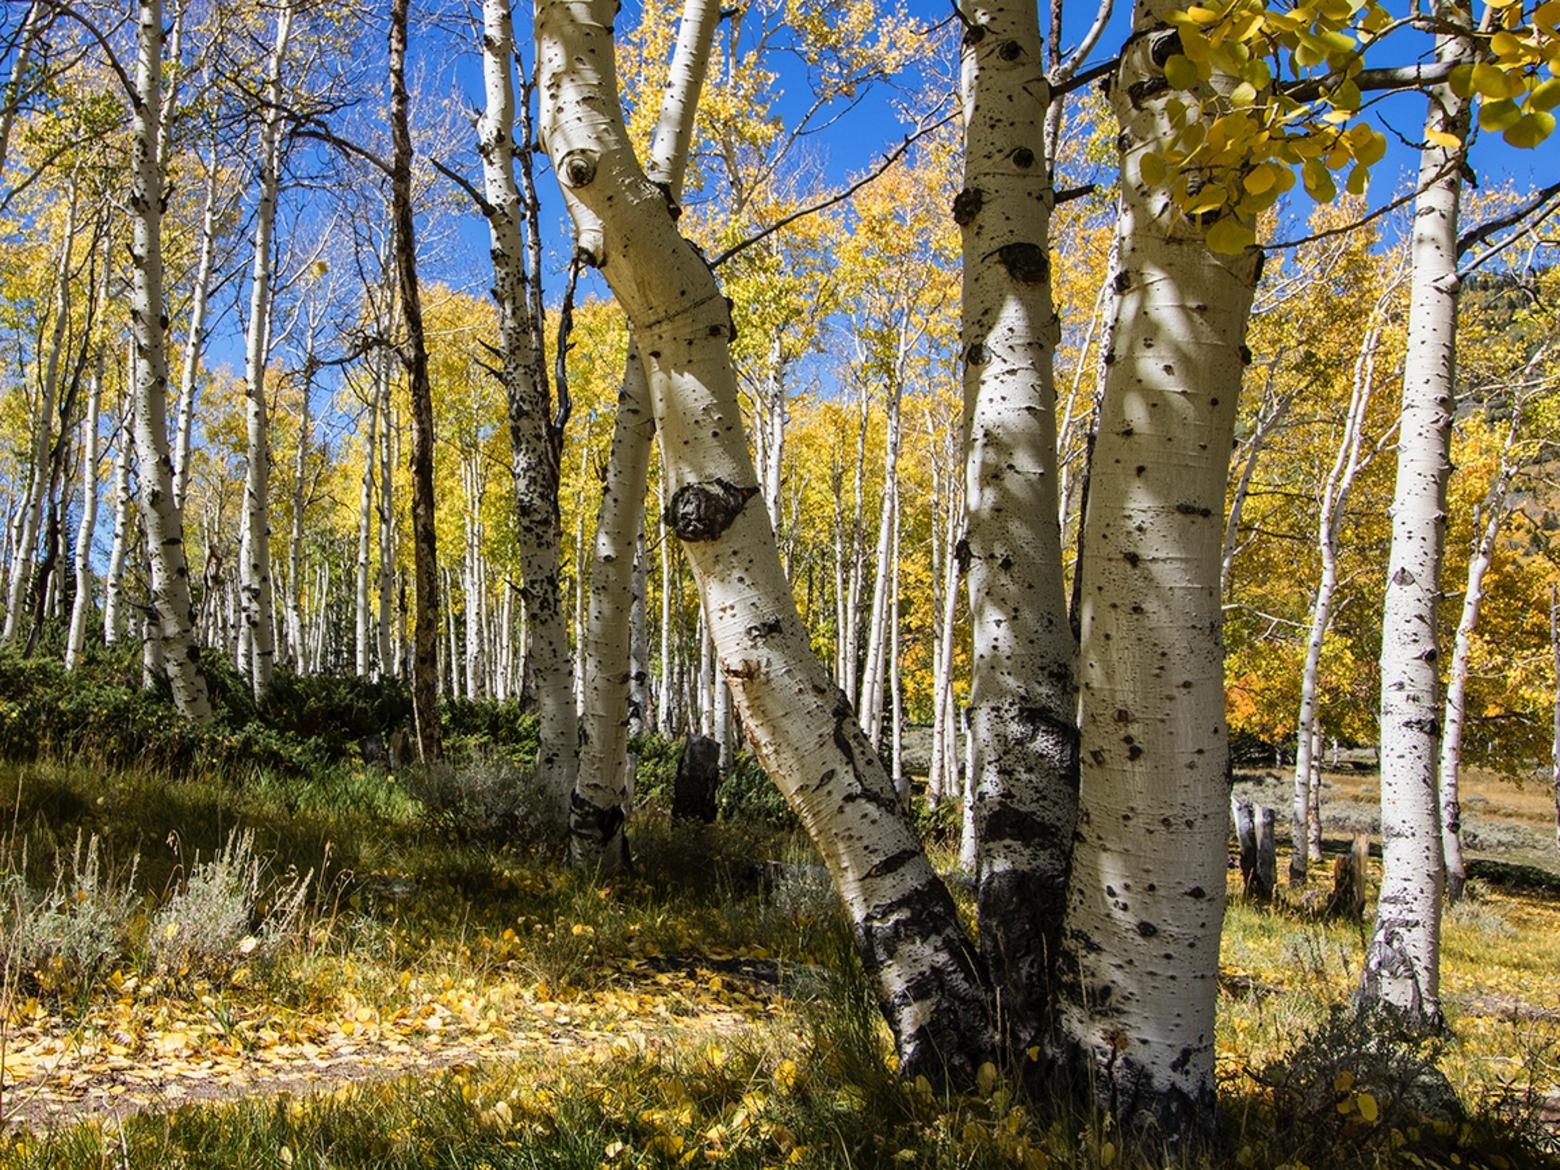 Pando is an amazing paradox—a massive grove of quaking aspen expressed in a multitude of colorful trunks but all part of the same single tree and root system.  As author Paul Rogers writes: "What you see here is a microcosm in aspen aesthetic and ecology—white, yellow, blue; pseudo-sibling trees joined as one:  a triple replications in DNA—lends dimension to Pando's autumn repose." Photo by Lance Oditt